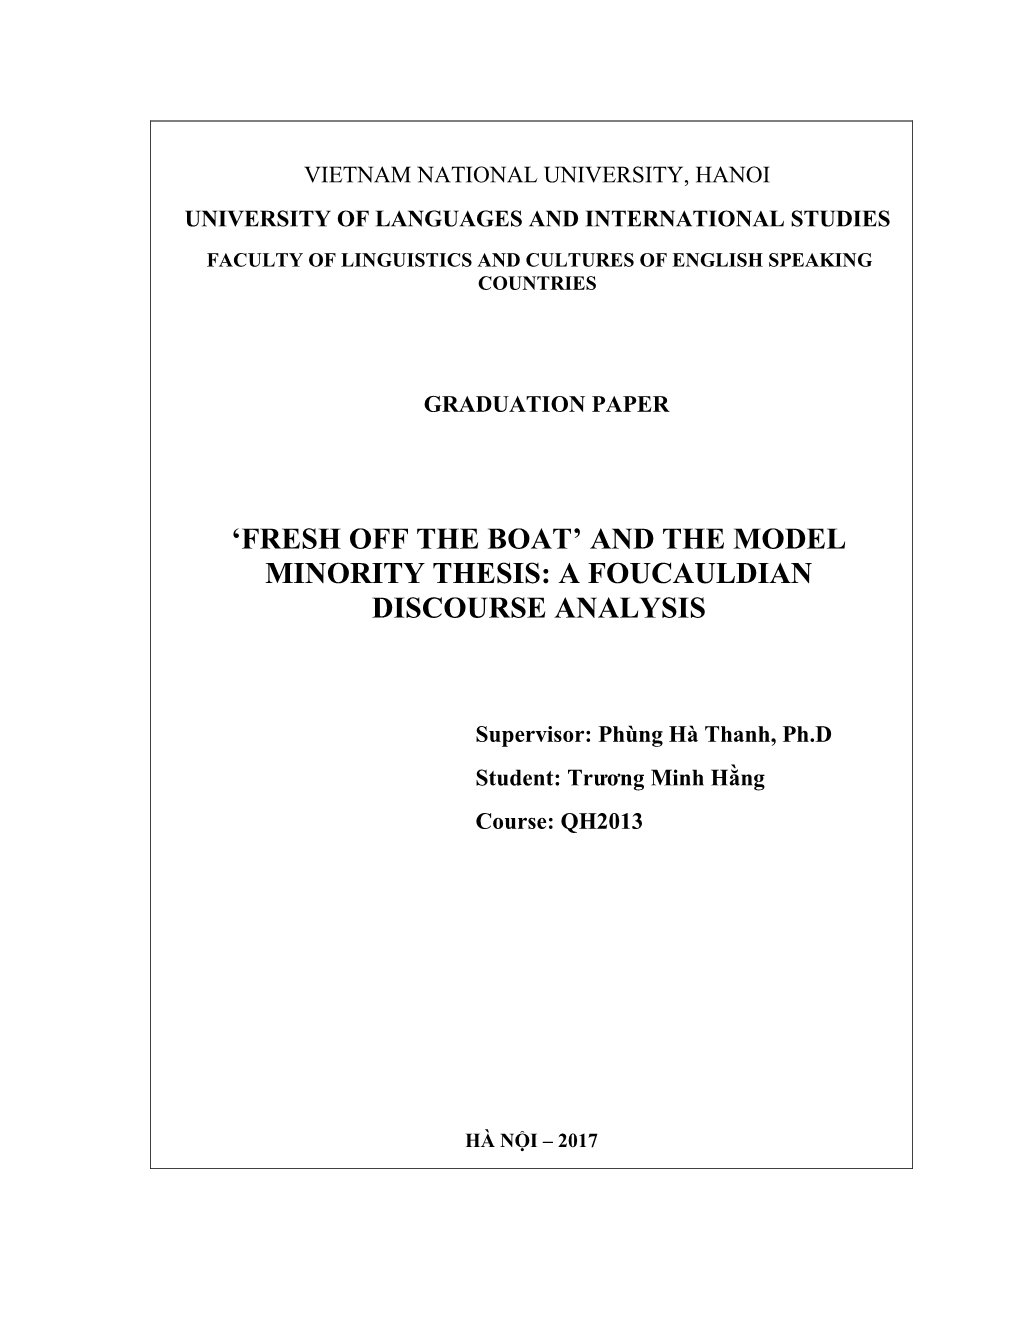 Fresh Off the Boat’ and the Model Minority Thesis: a Foucauldian Discourse Analysis